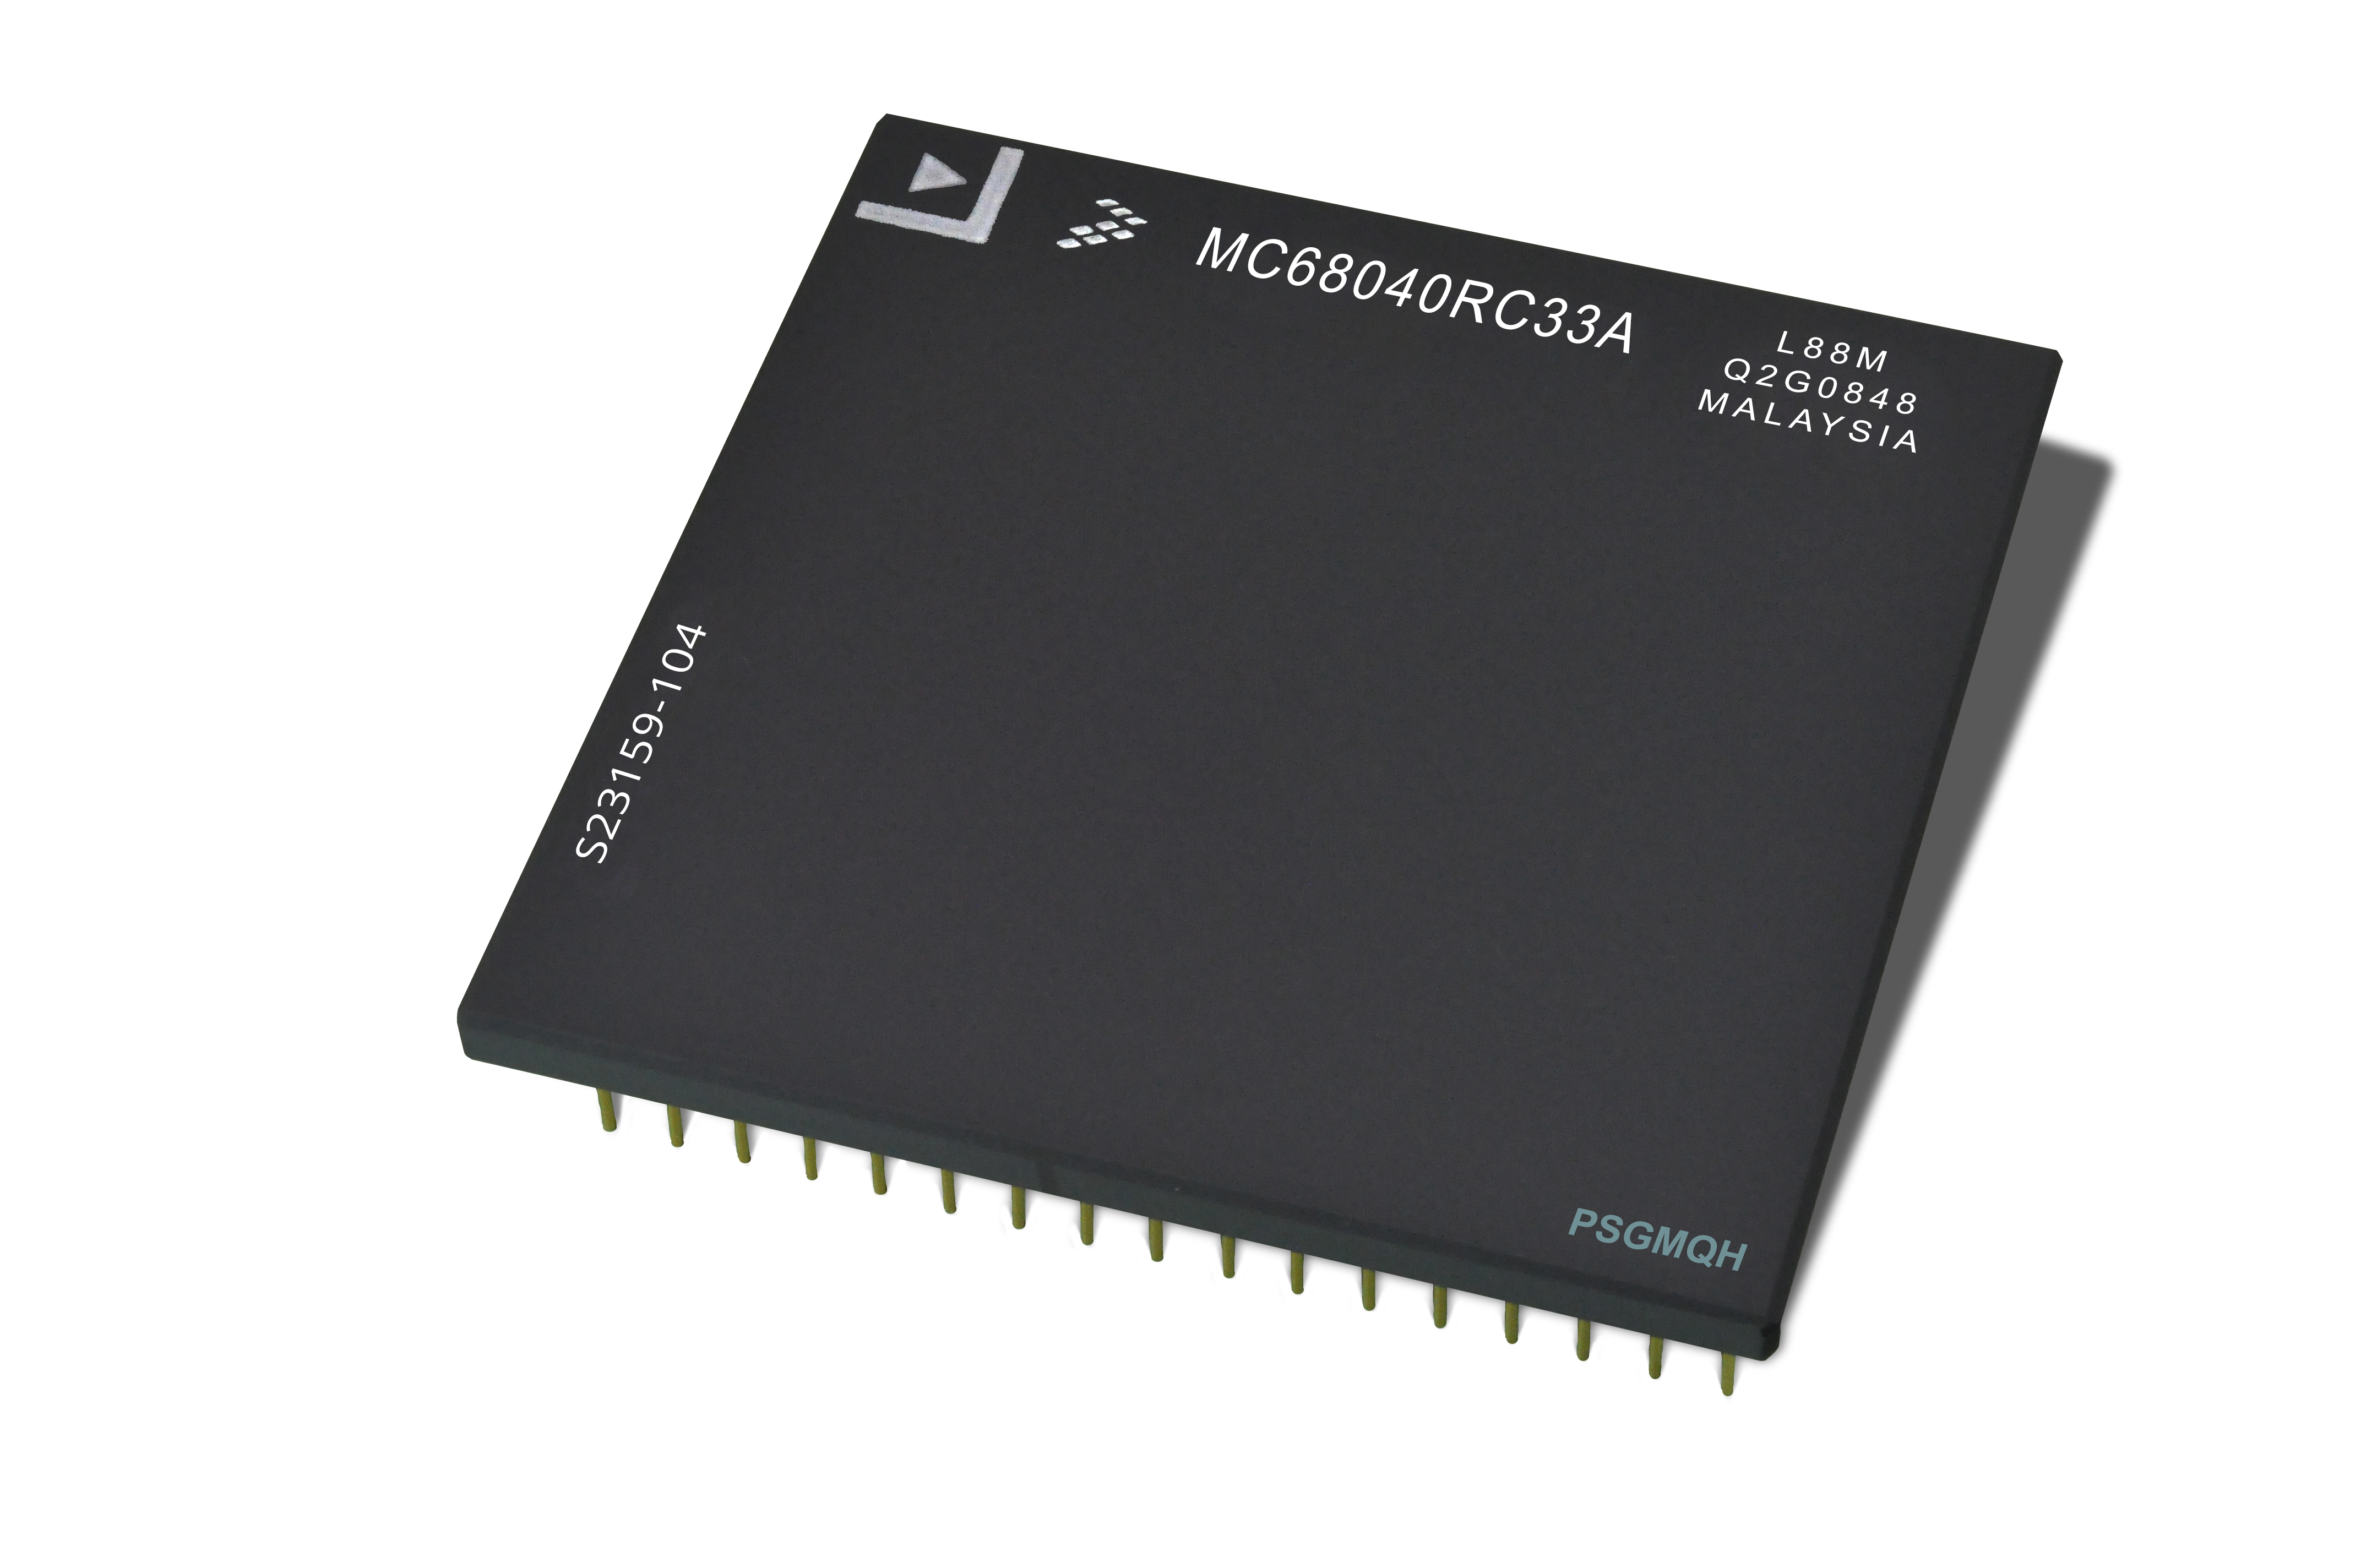 Figure 2 - The MC68040 is widely used in SBC platforms